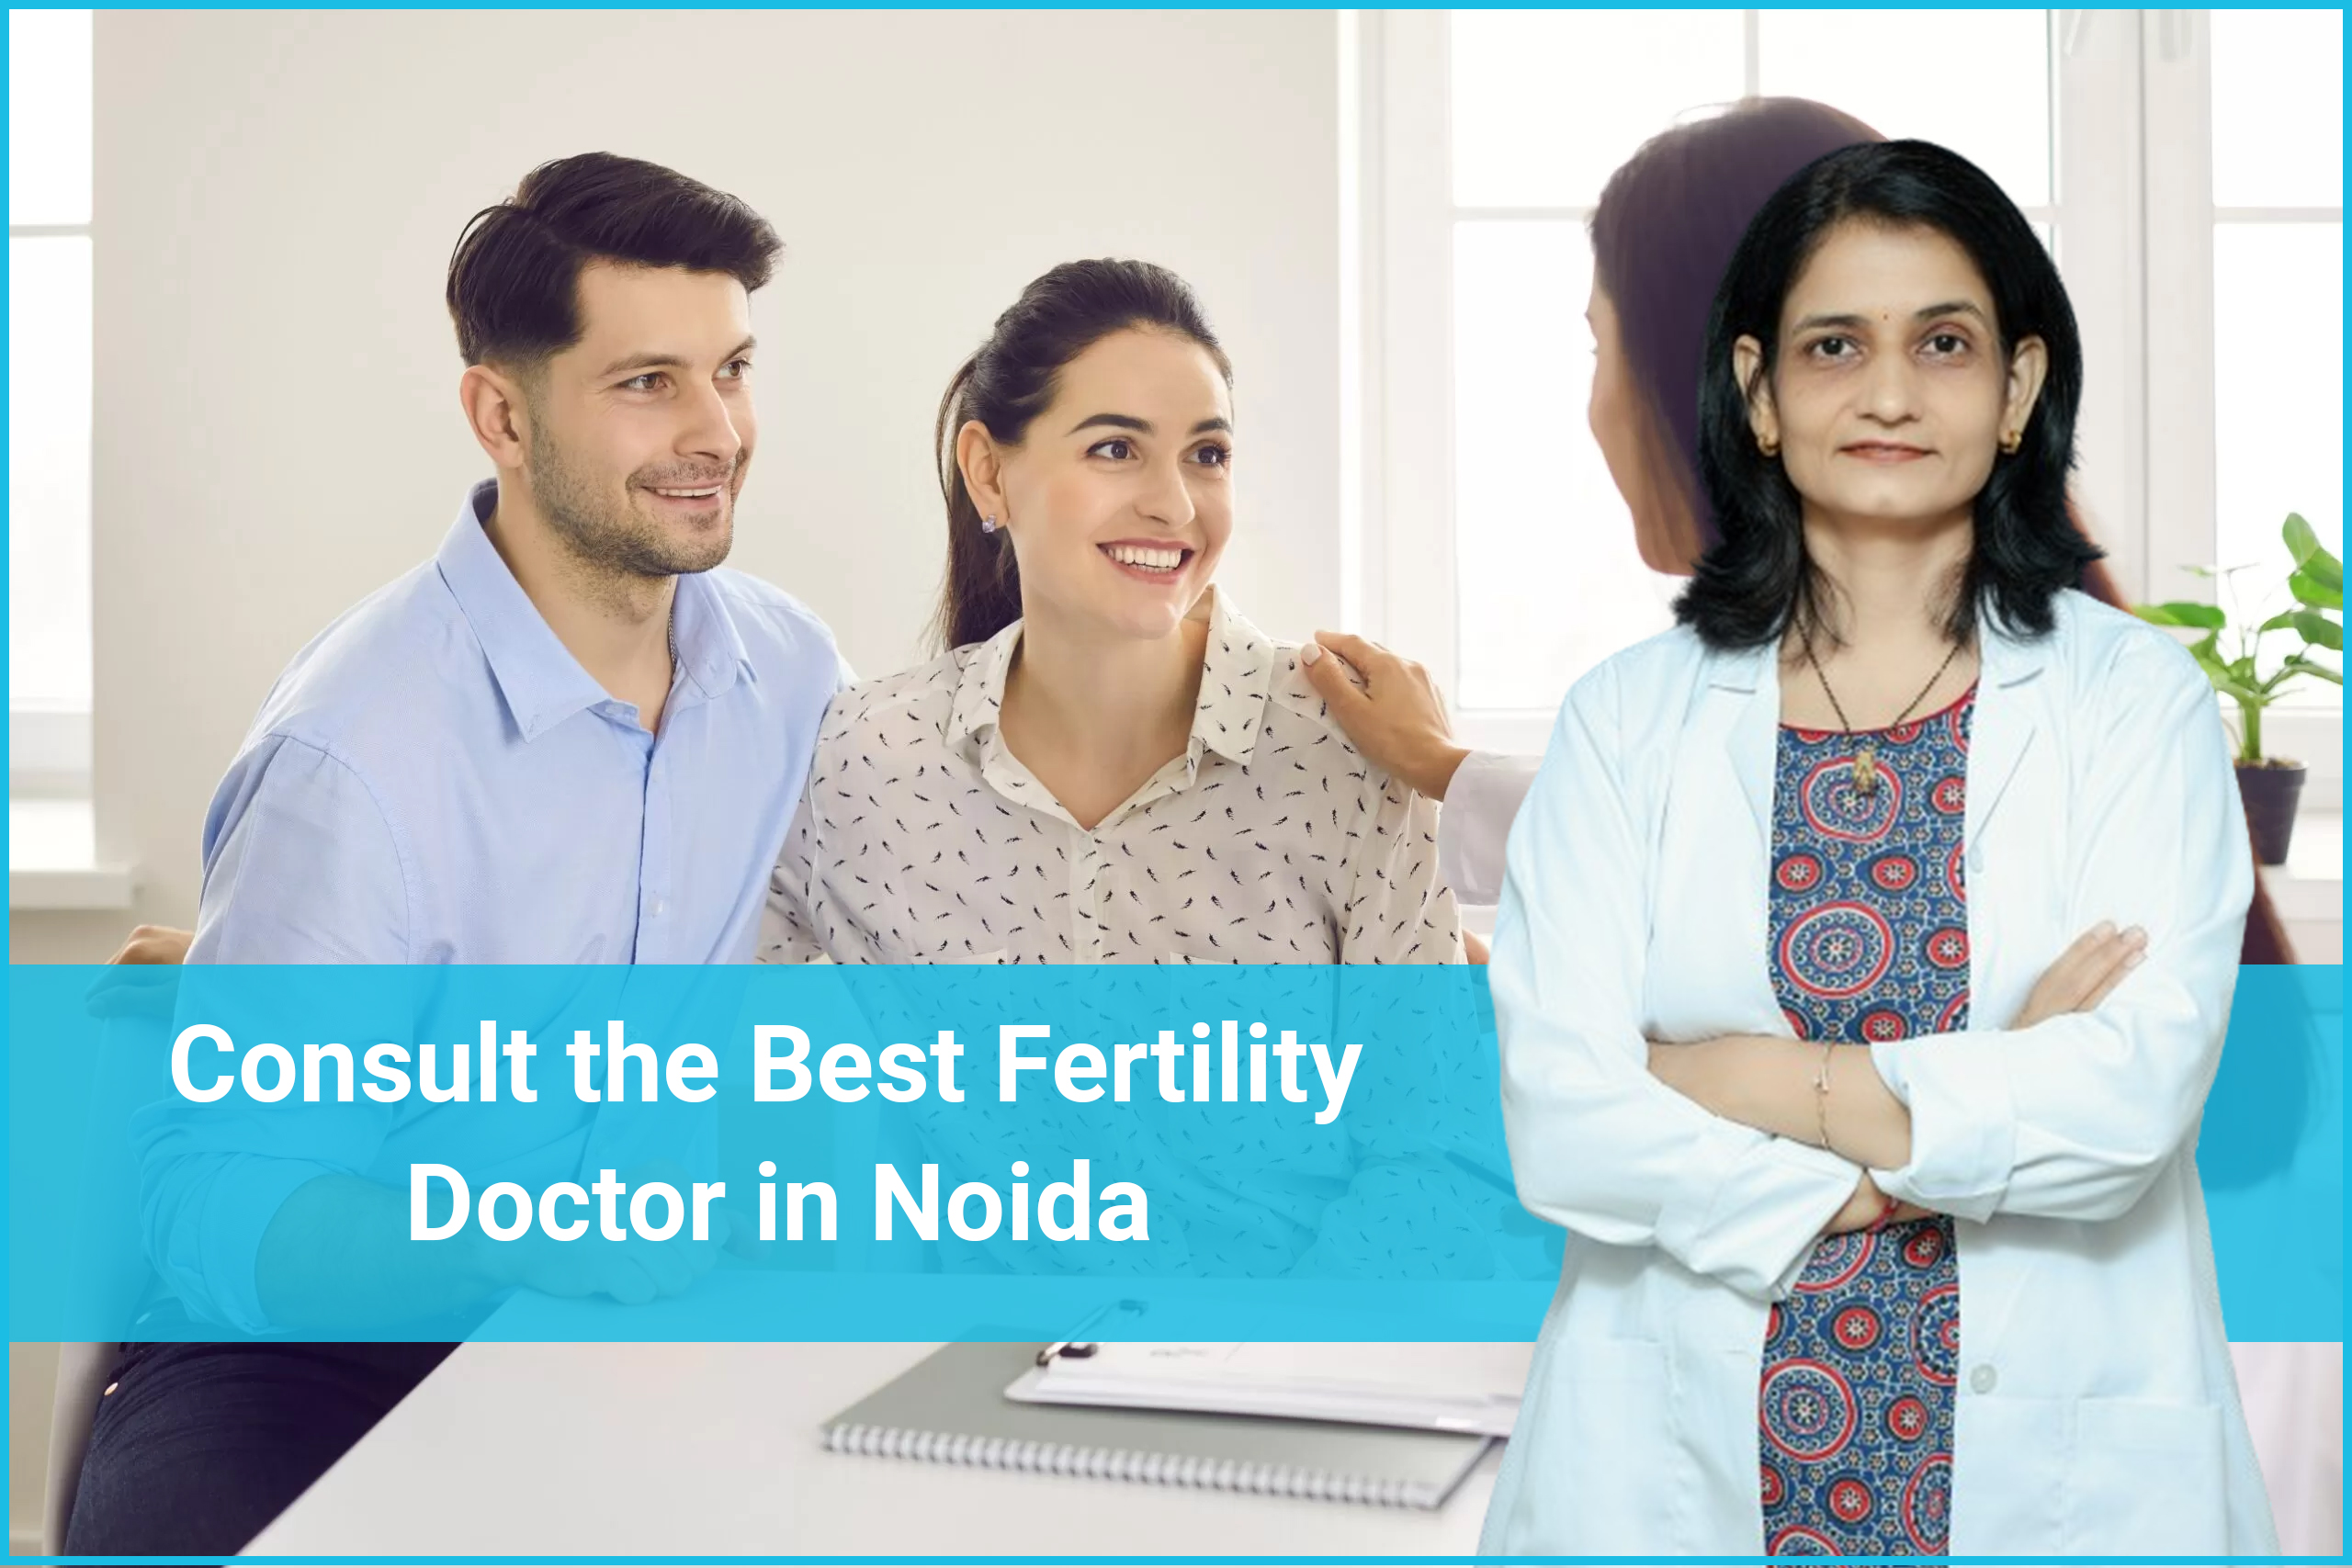 Consult the Best Fertility Doctor in Noida